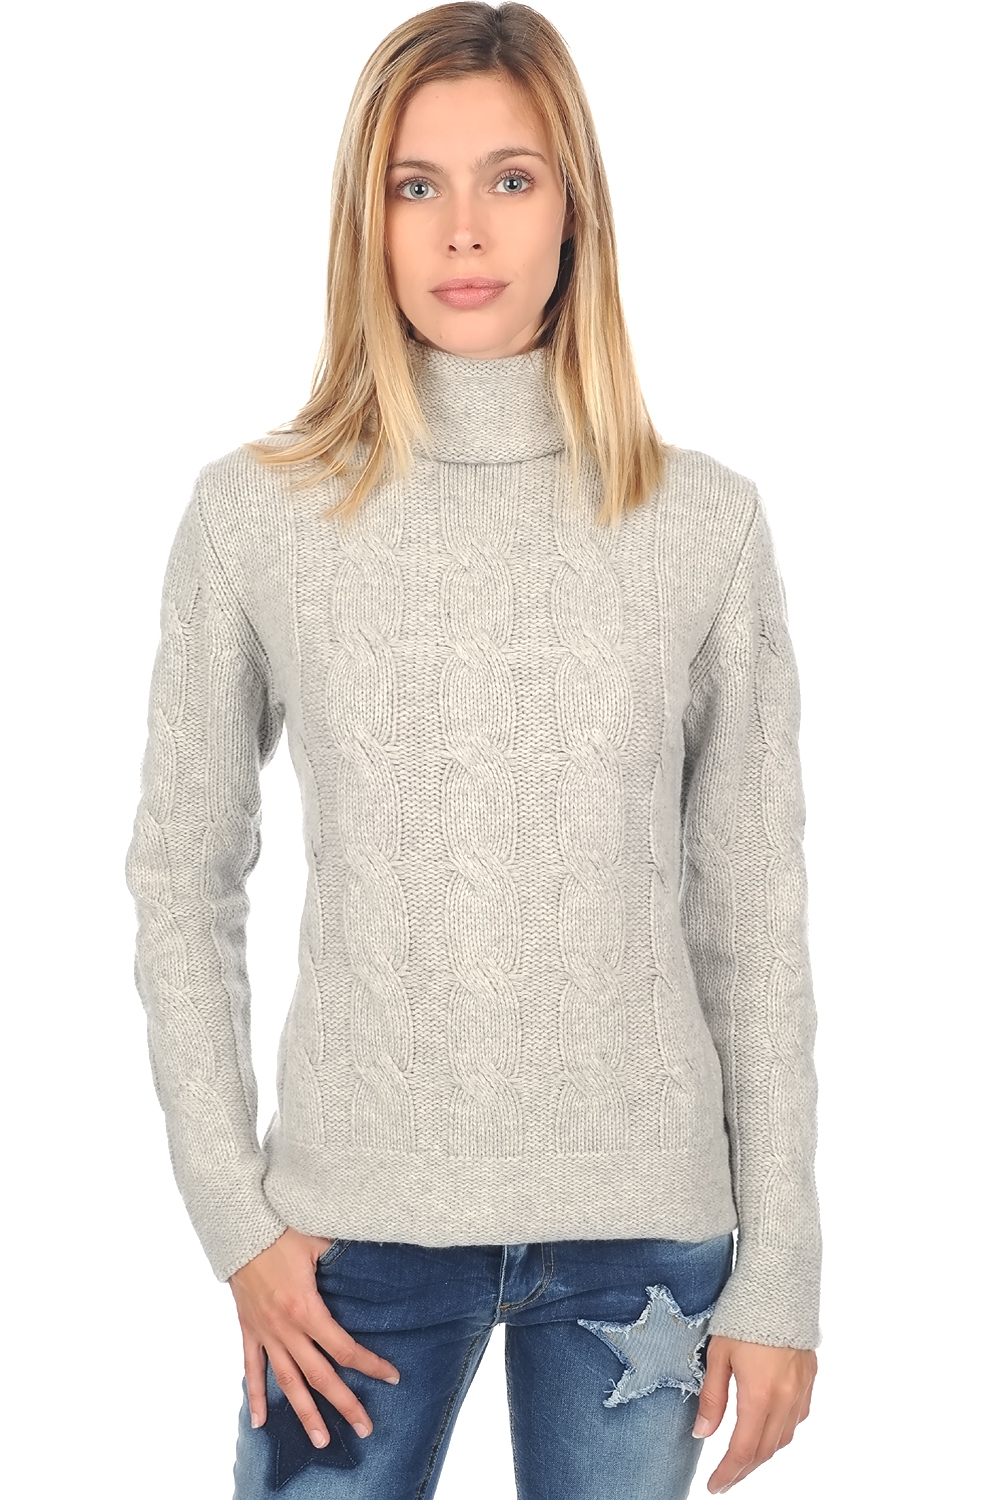 Cachemire pull femme col roule blanche flanelle chine 3xl